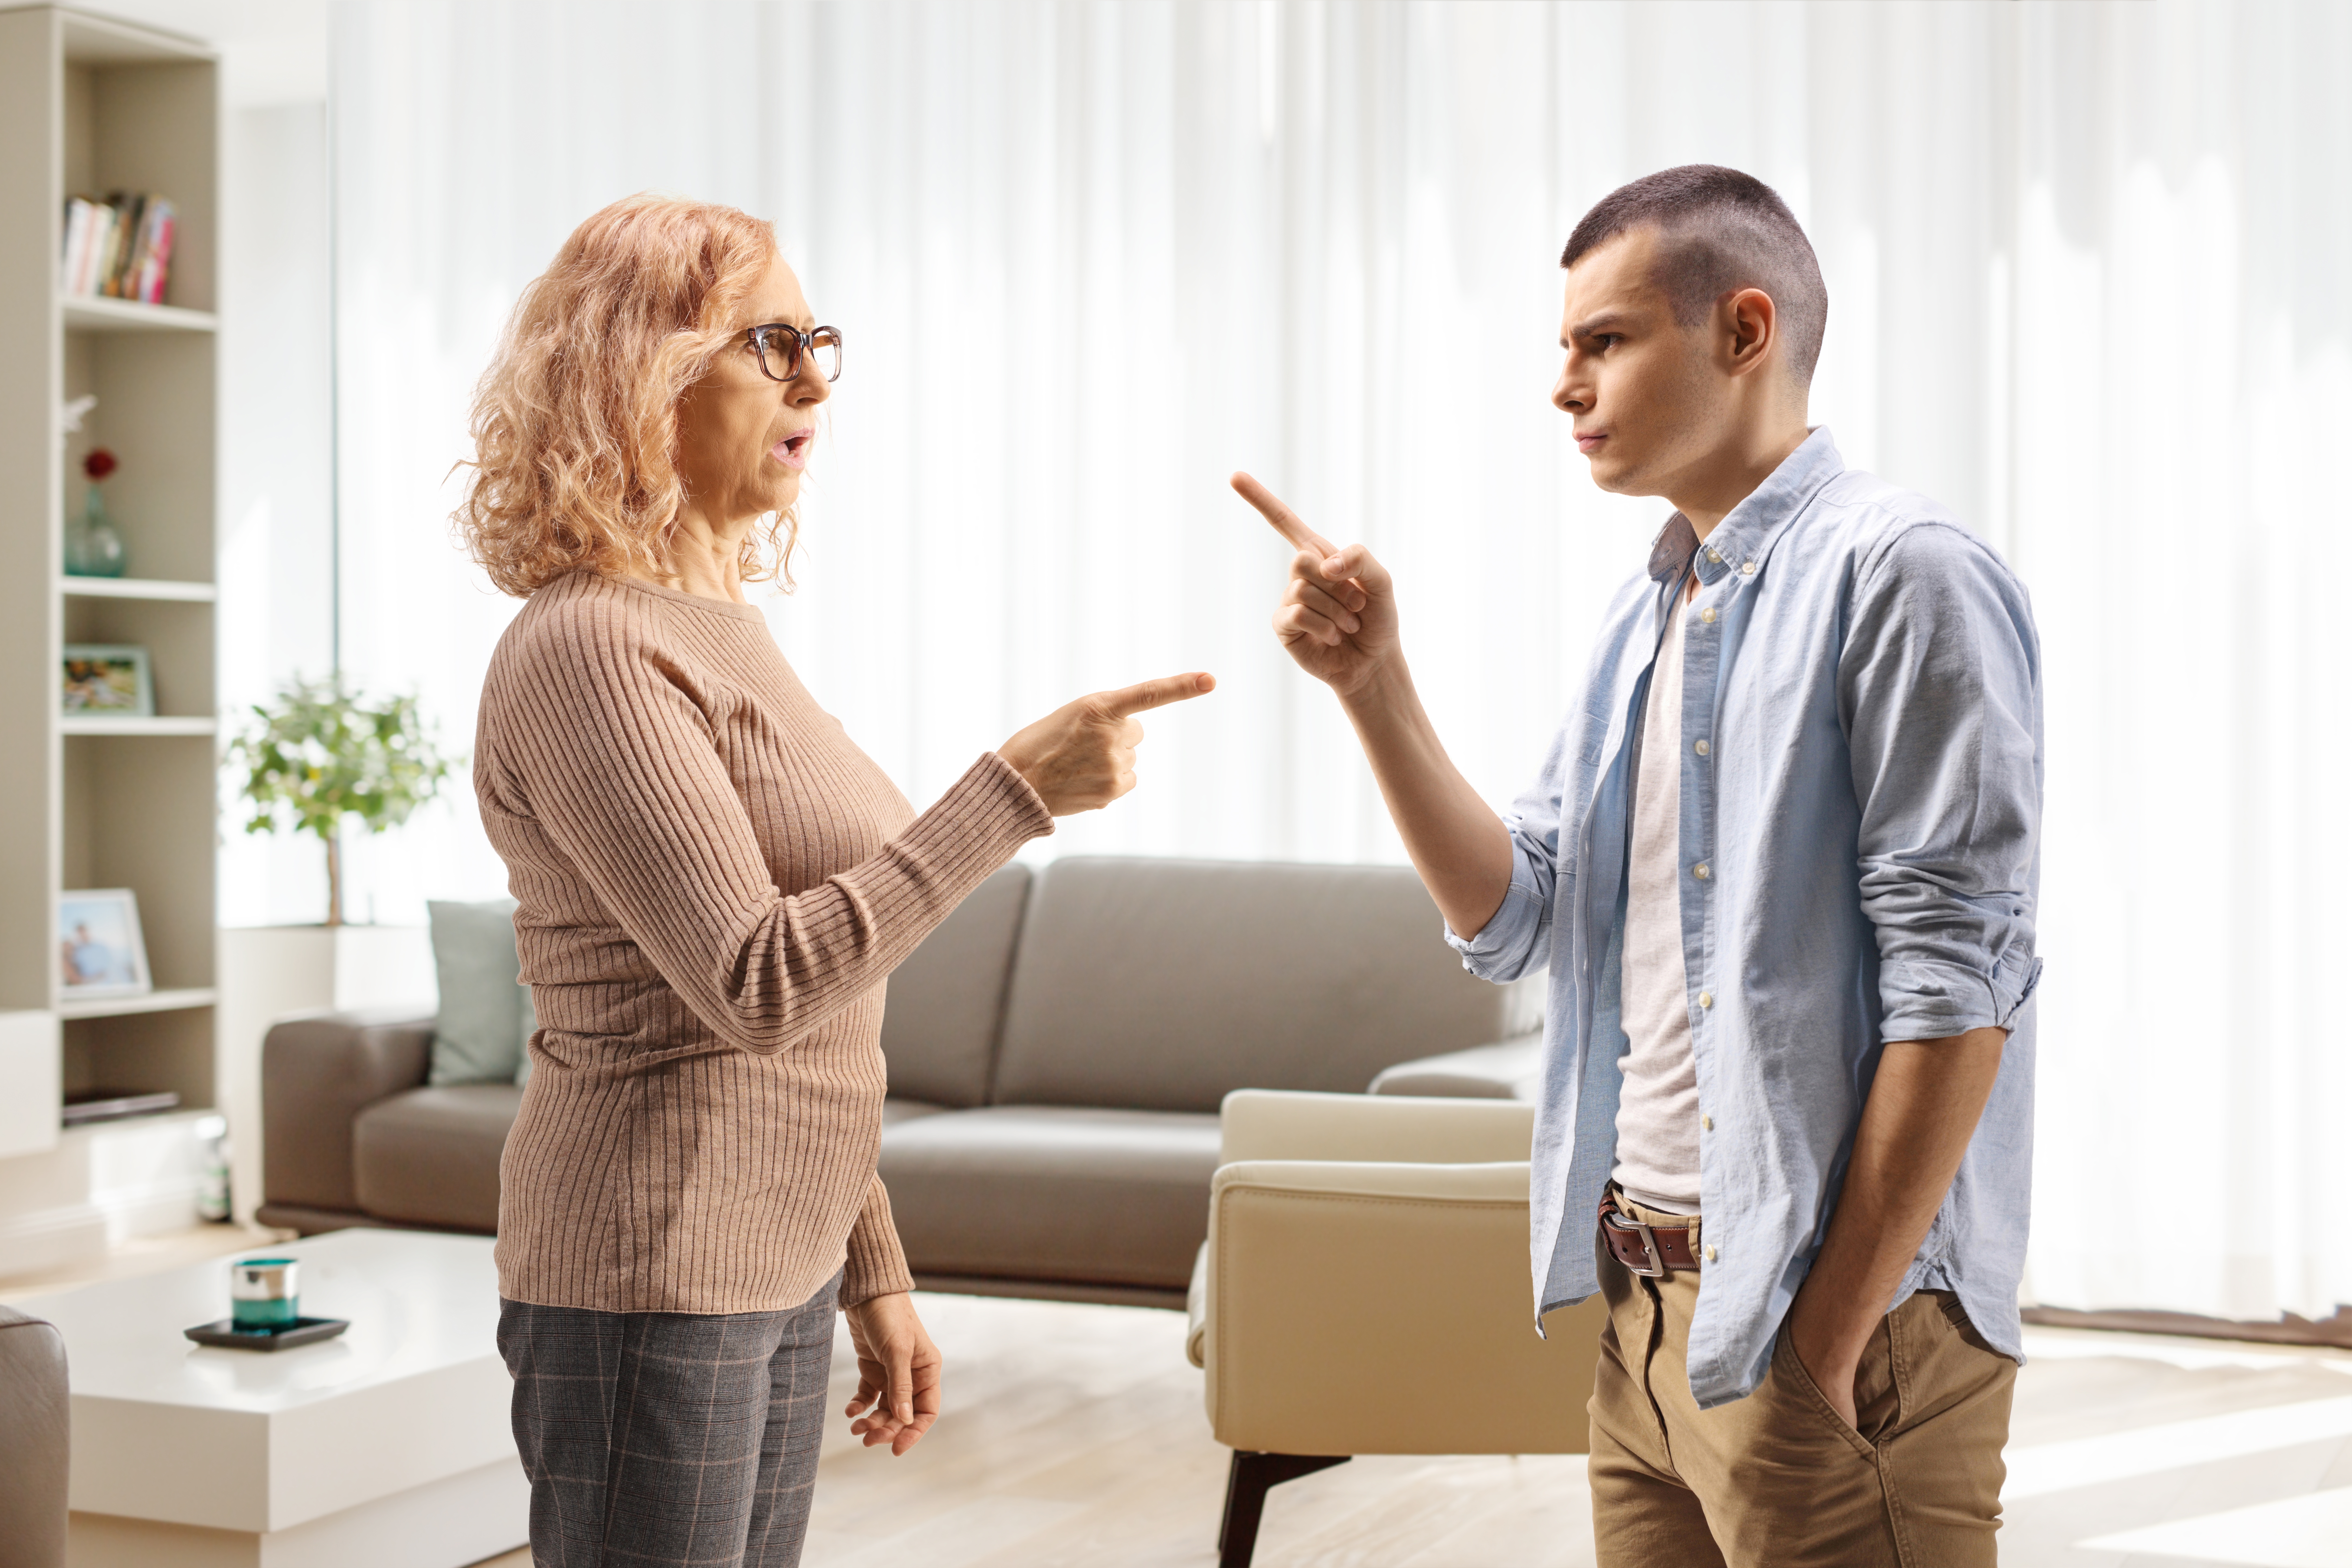 A mother arguing with her son at home | Source: Shutterstock